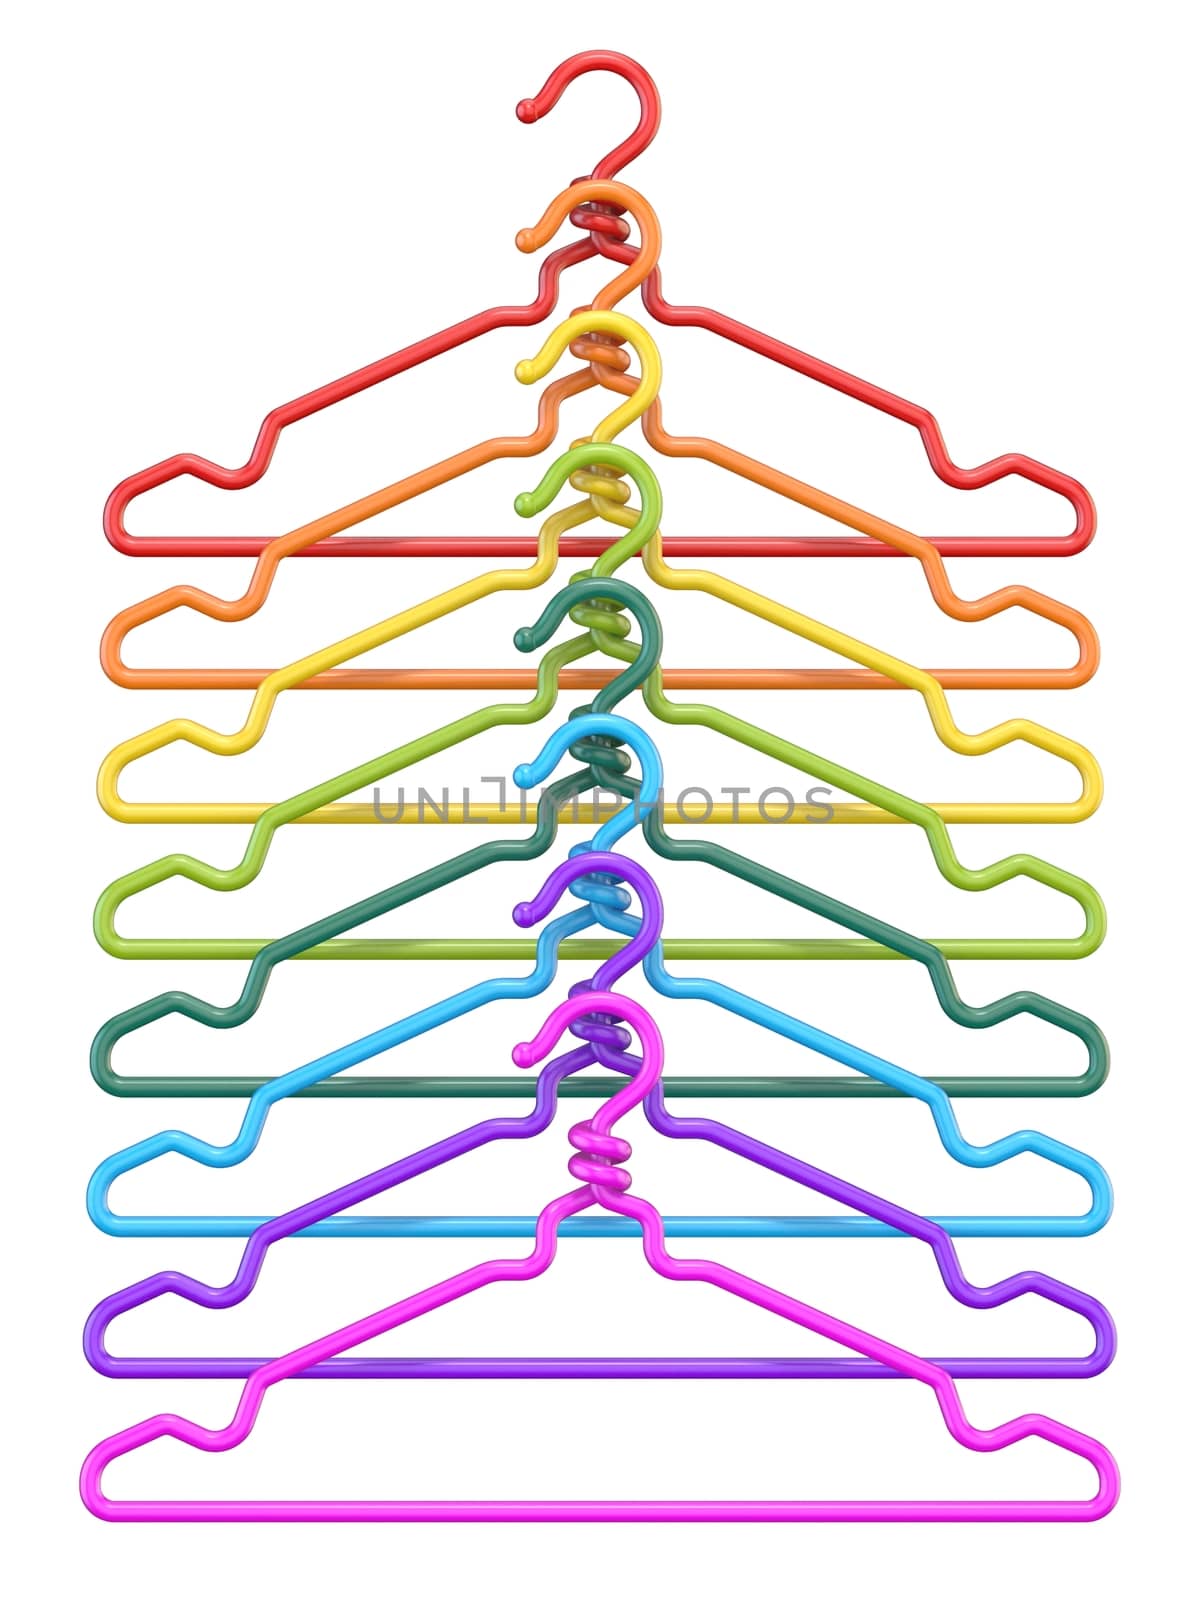 Colorful wire cloth hanger 3D render illustration isolated on white background